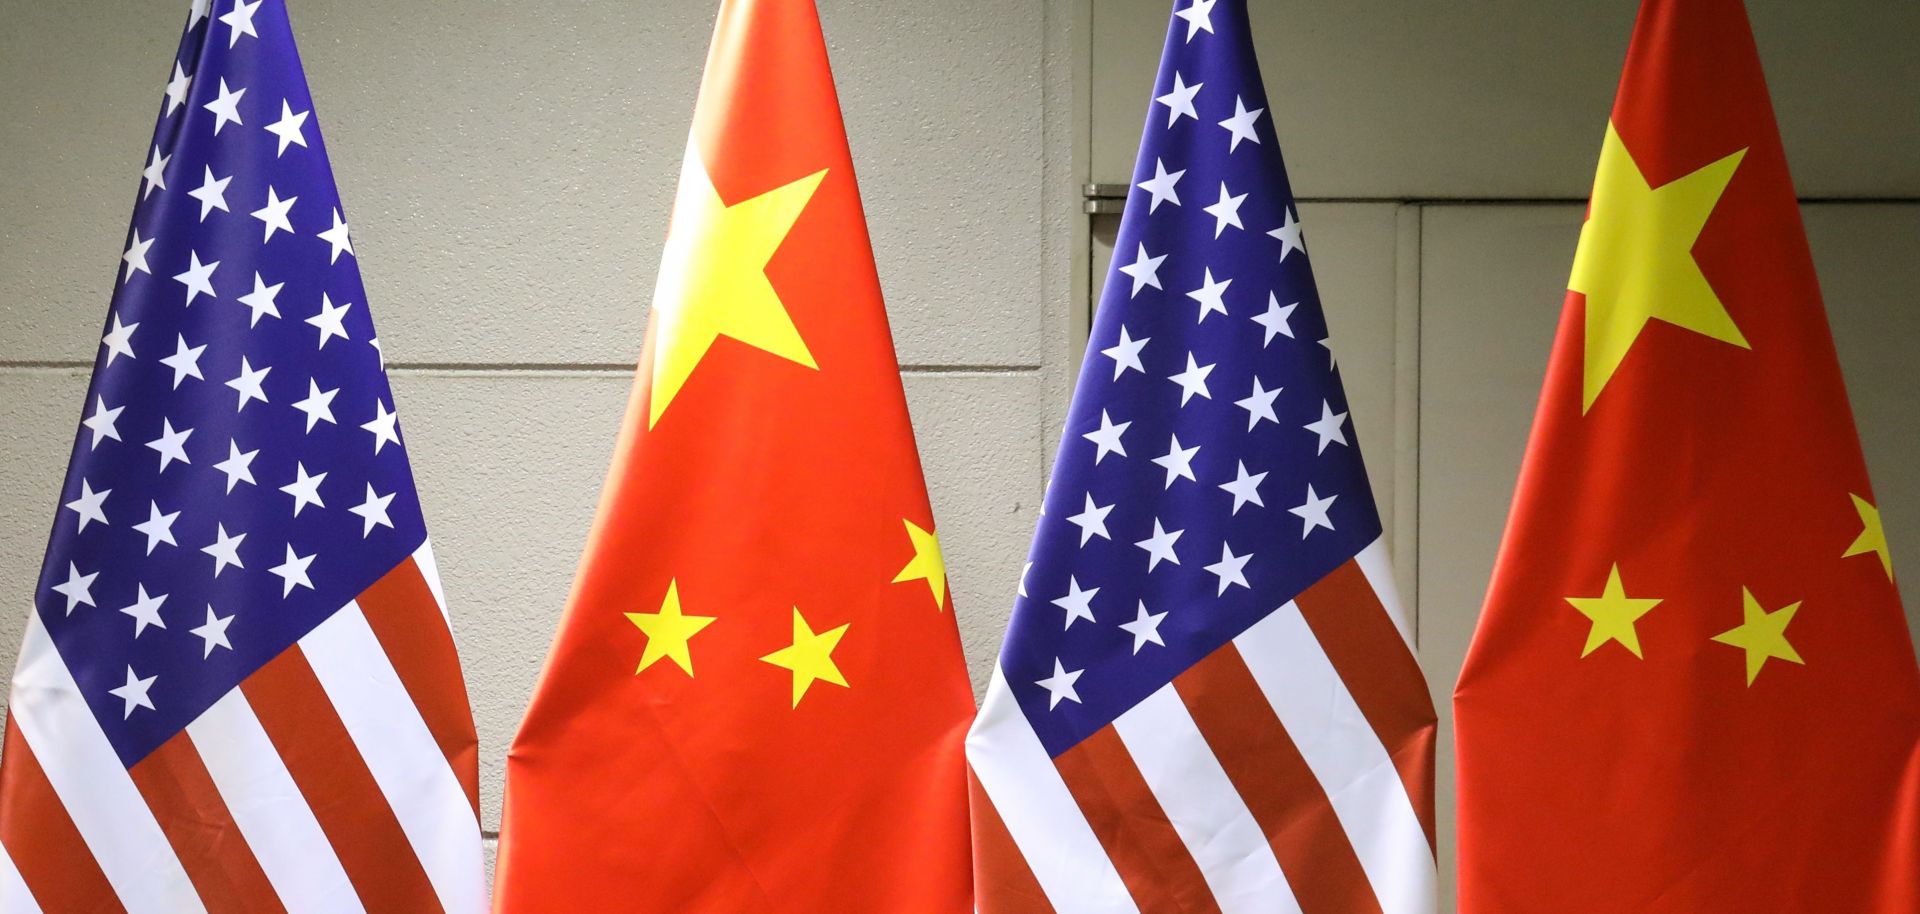 The national flags of China and the United States.